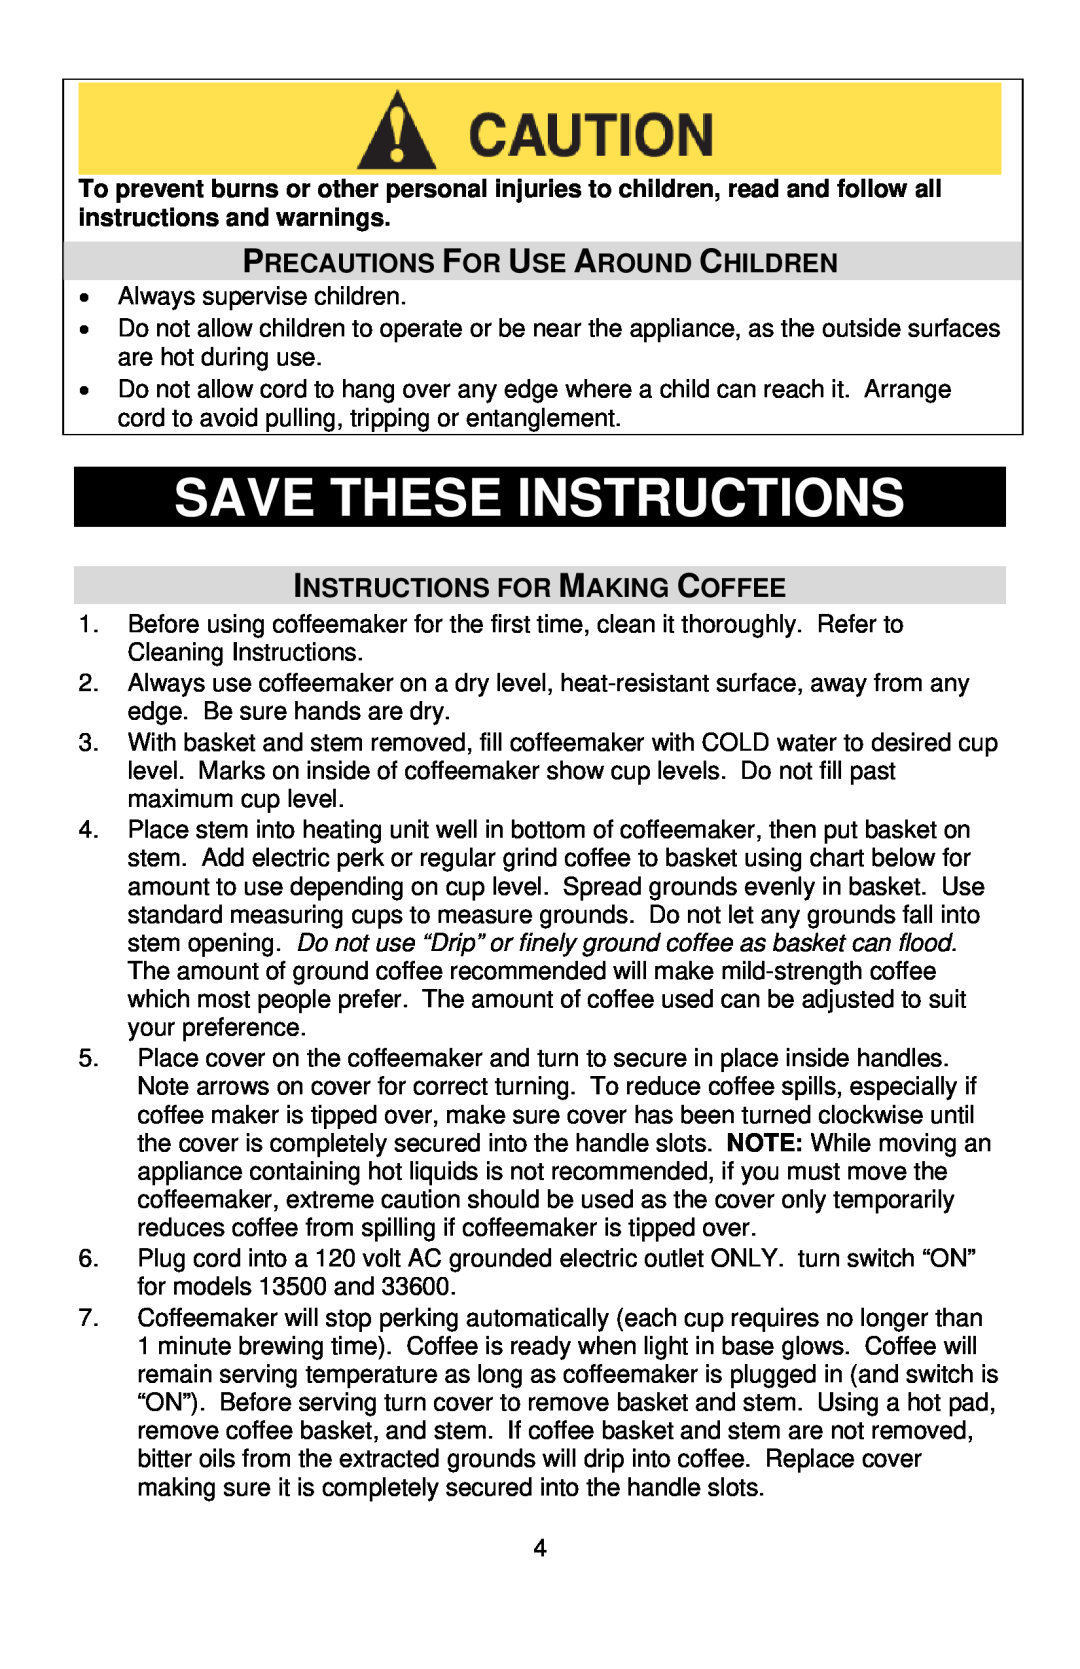 West Bend LARGE CAPACITY COFFEEMAKERS instruction manual Save These Instructions, Precautions For Use Around Children 